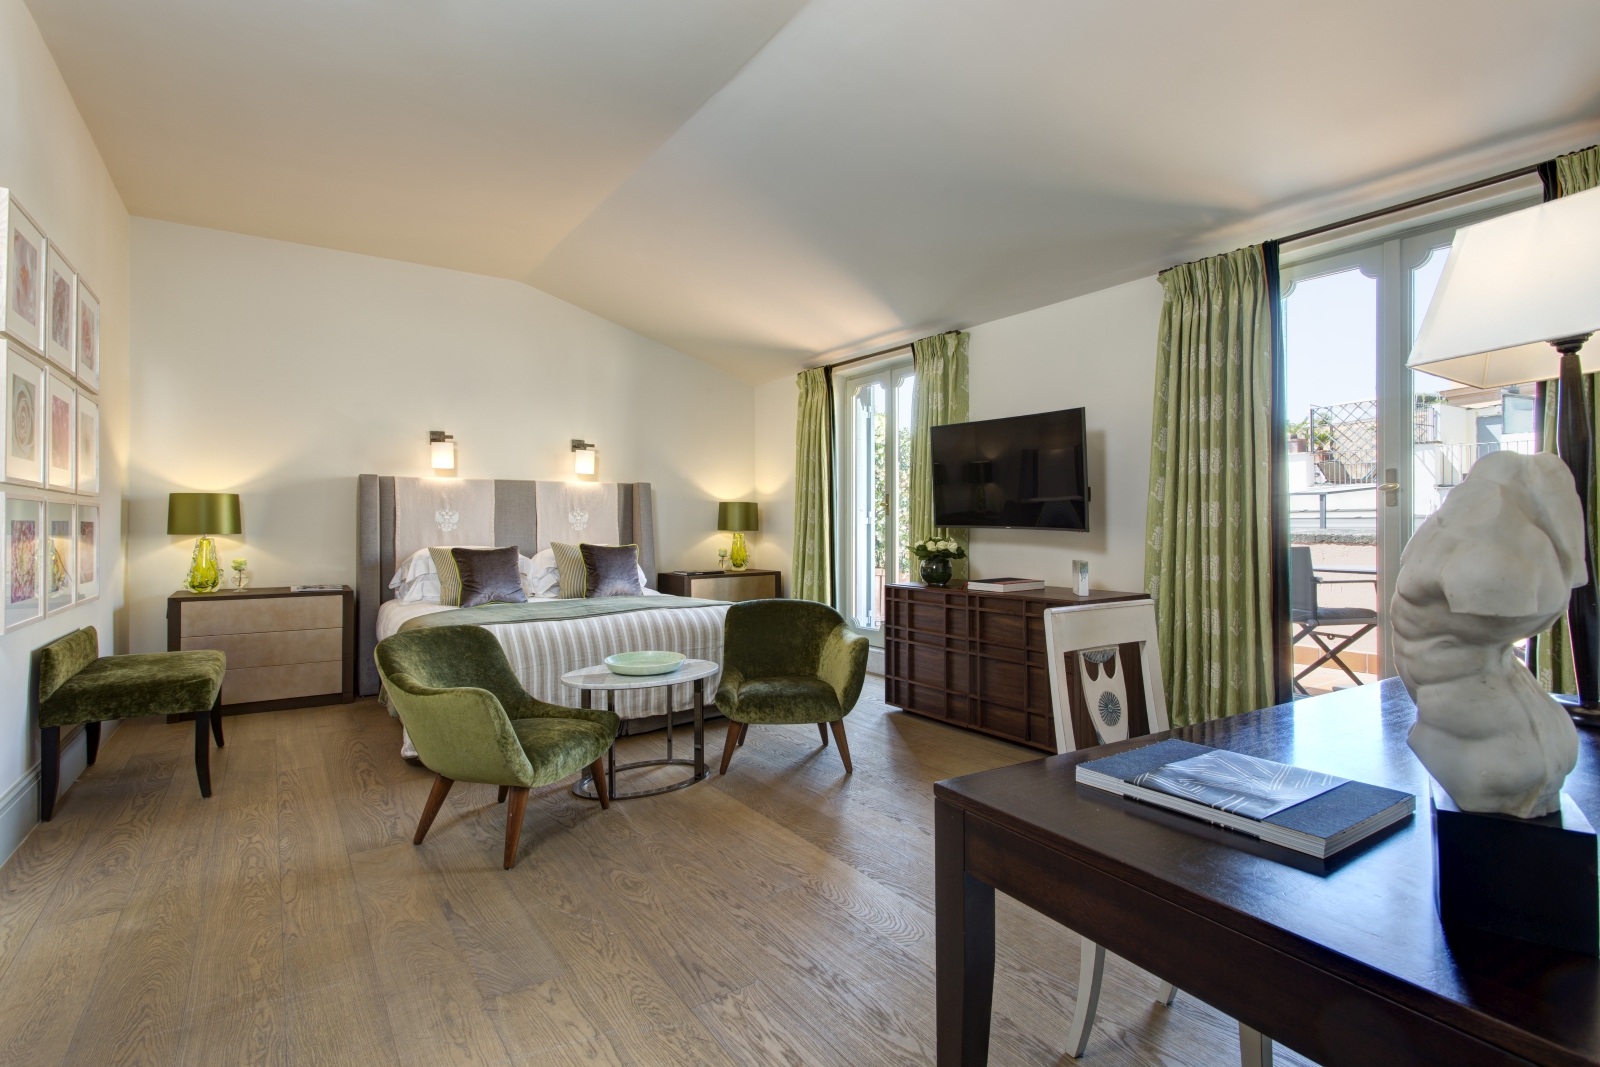 Junior suite with private balcony at Hotel de Russie, luxury hotel in Rome, Italy